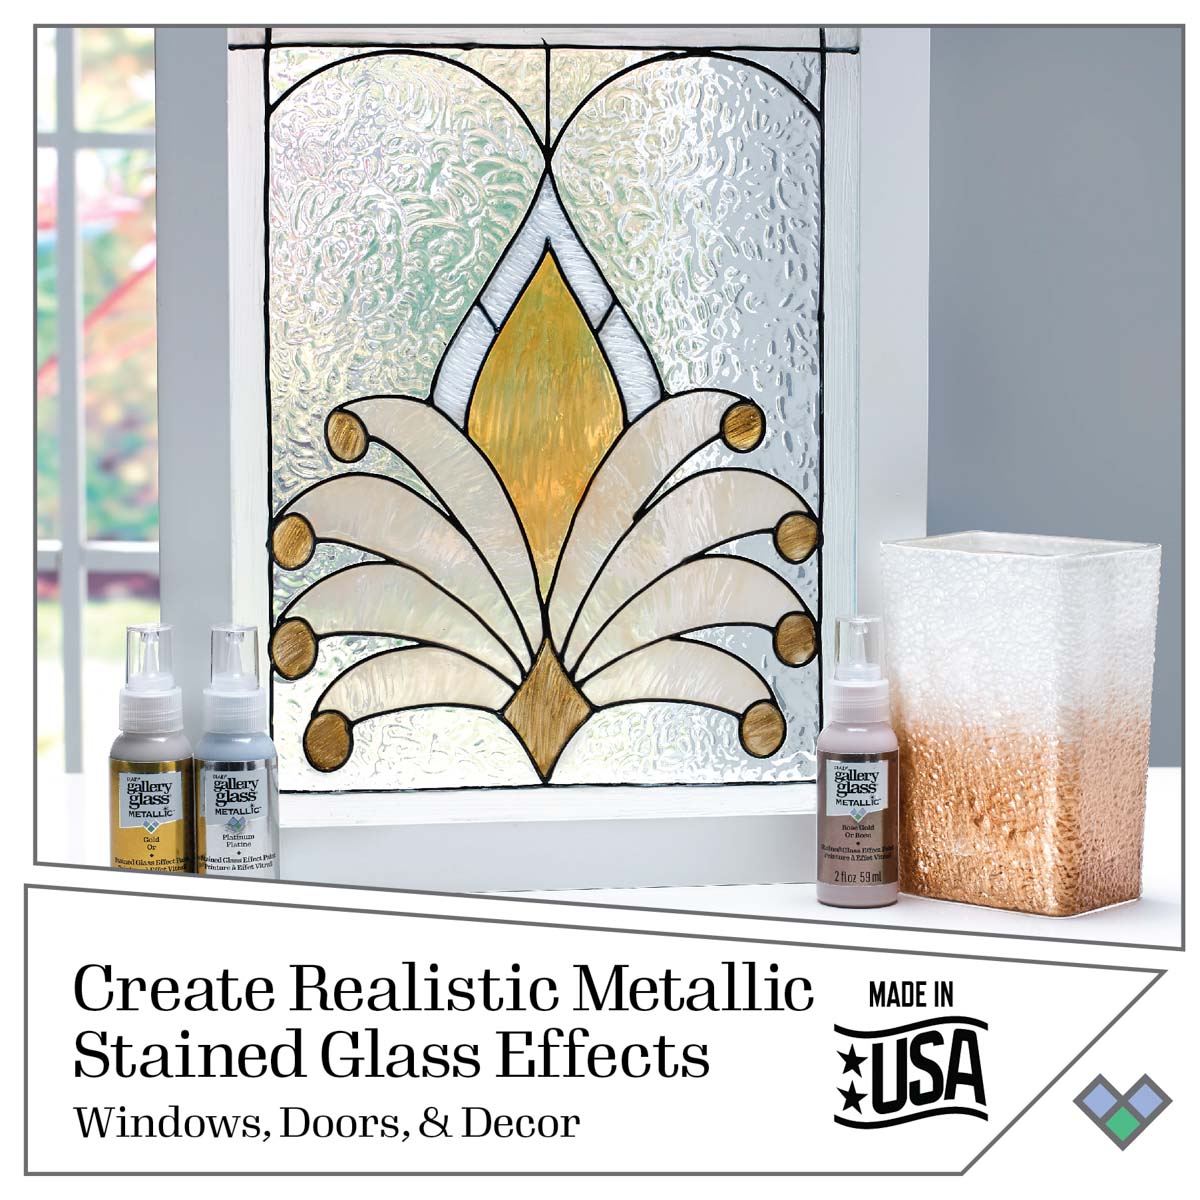 Gallery Glass ® Metallic™ Stained Glass Effect Paint - Rose Gold, 2 oz. - 19679